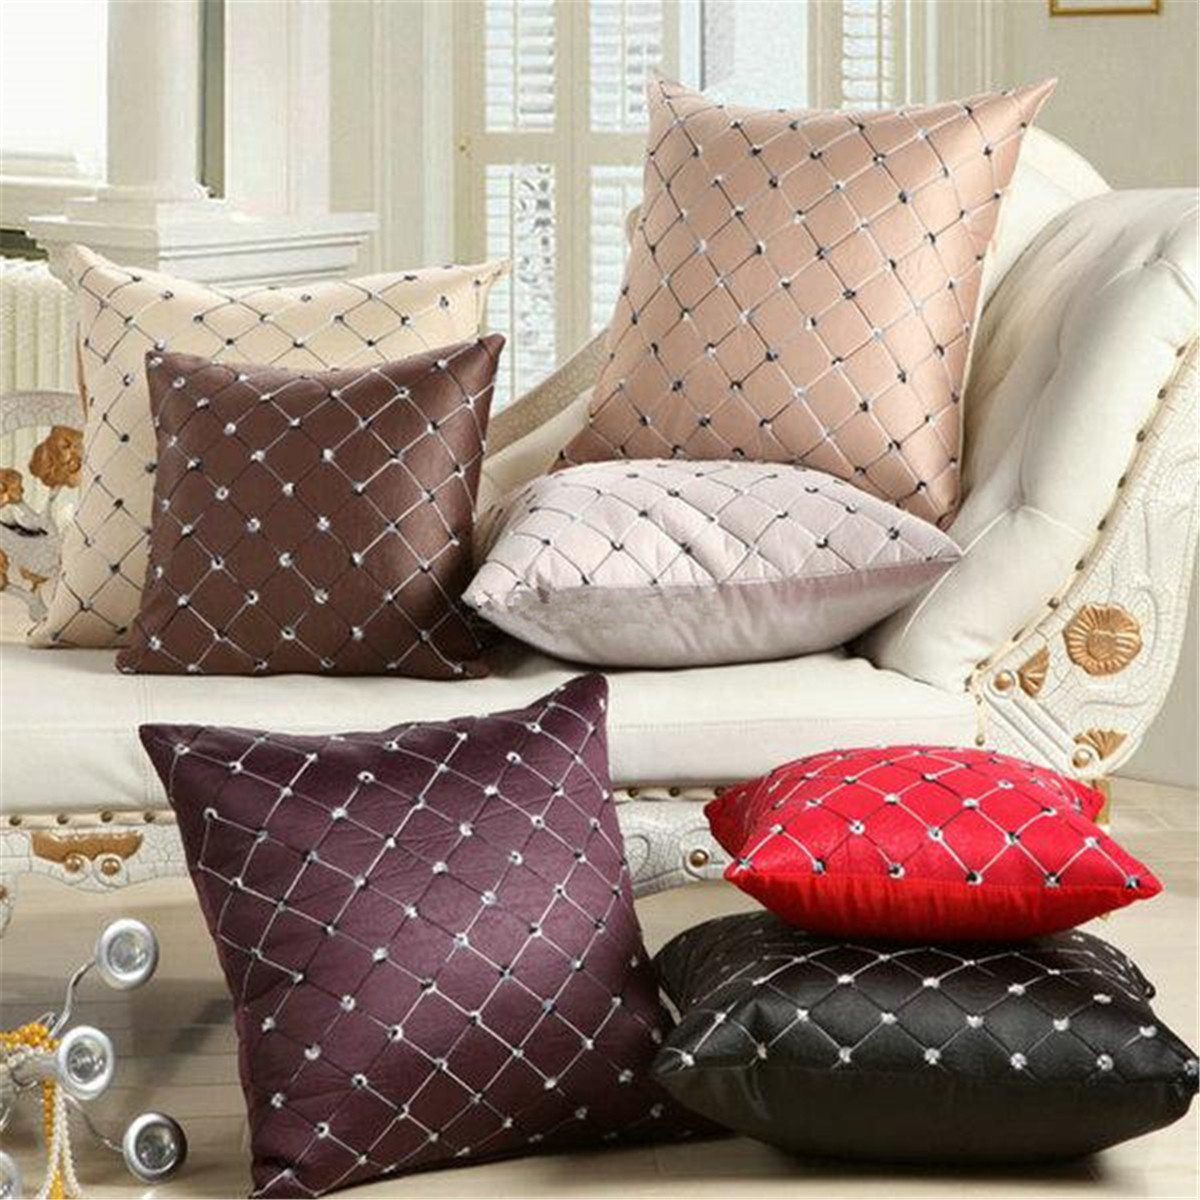 17-Square-Embroidered-Pillow-Case--Home-Decor-Grid-Waist-Throw-Cushion-Cover-1387986